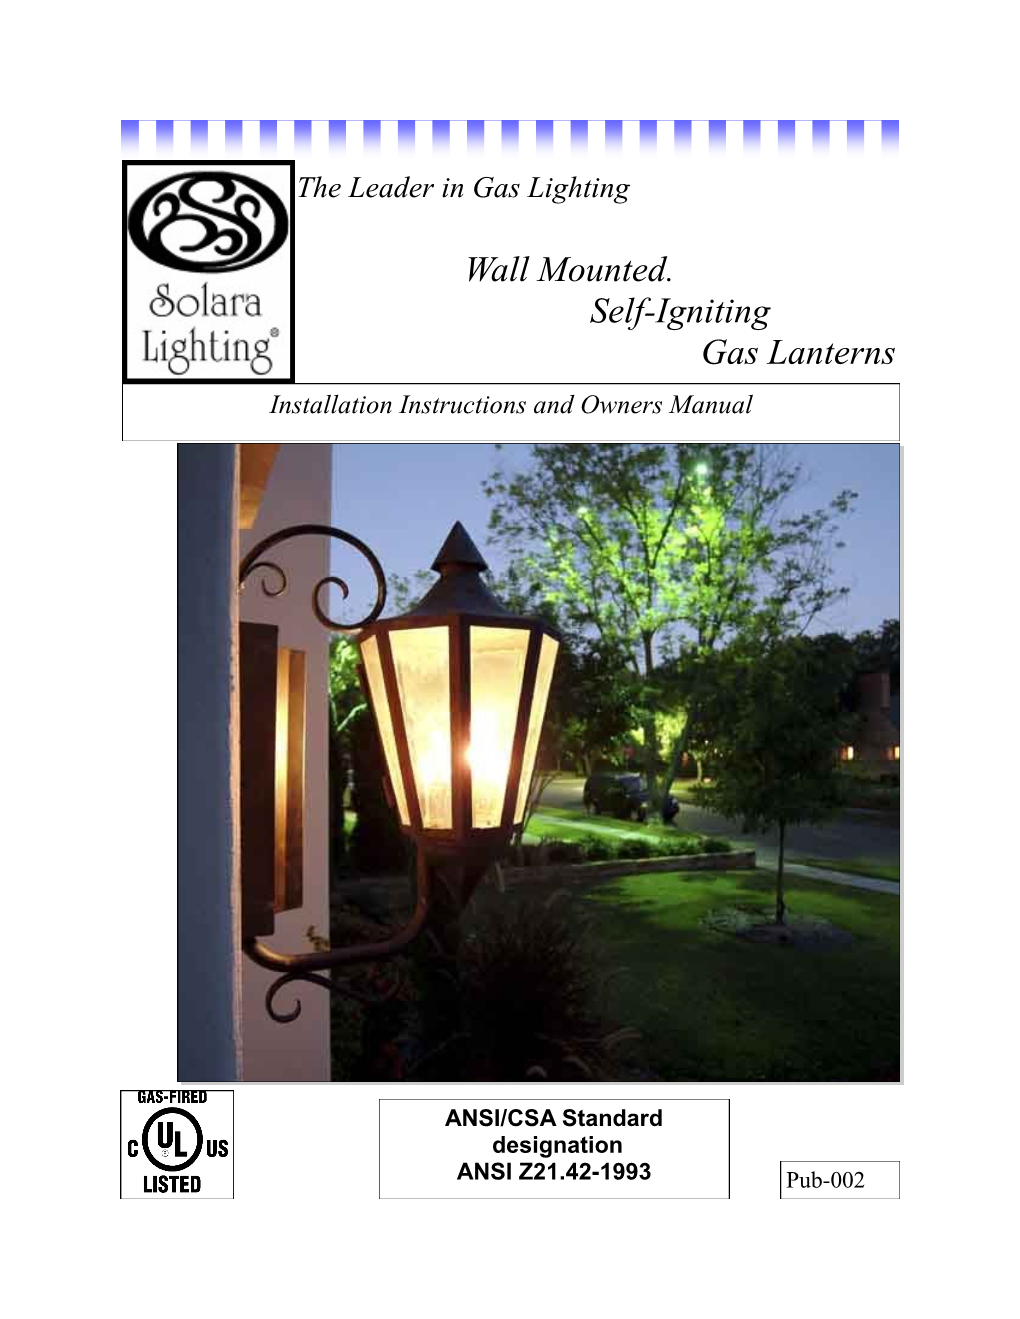 Wall Mounted. Self-Igniting Gas Lanterns Installation Instructions and Owners Manual